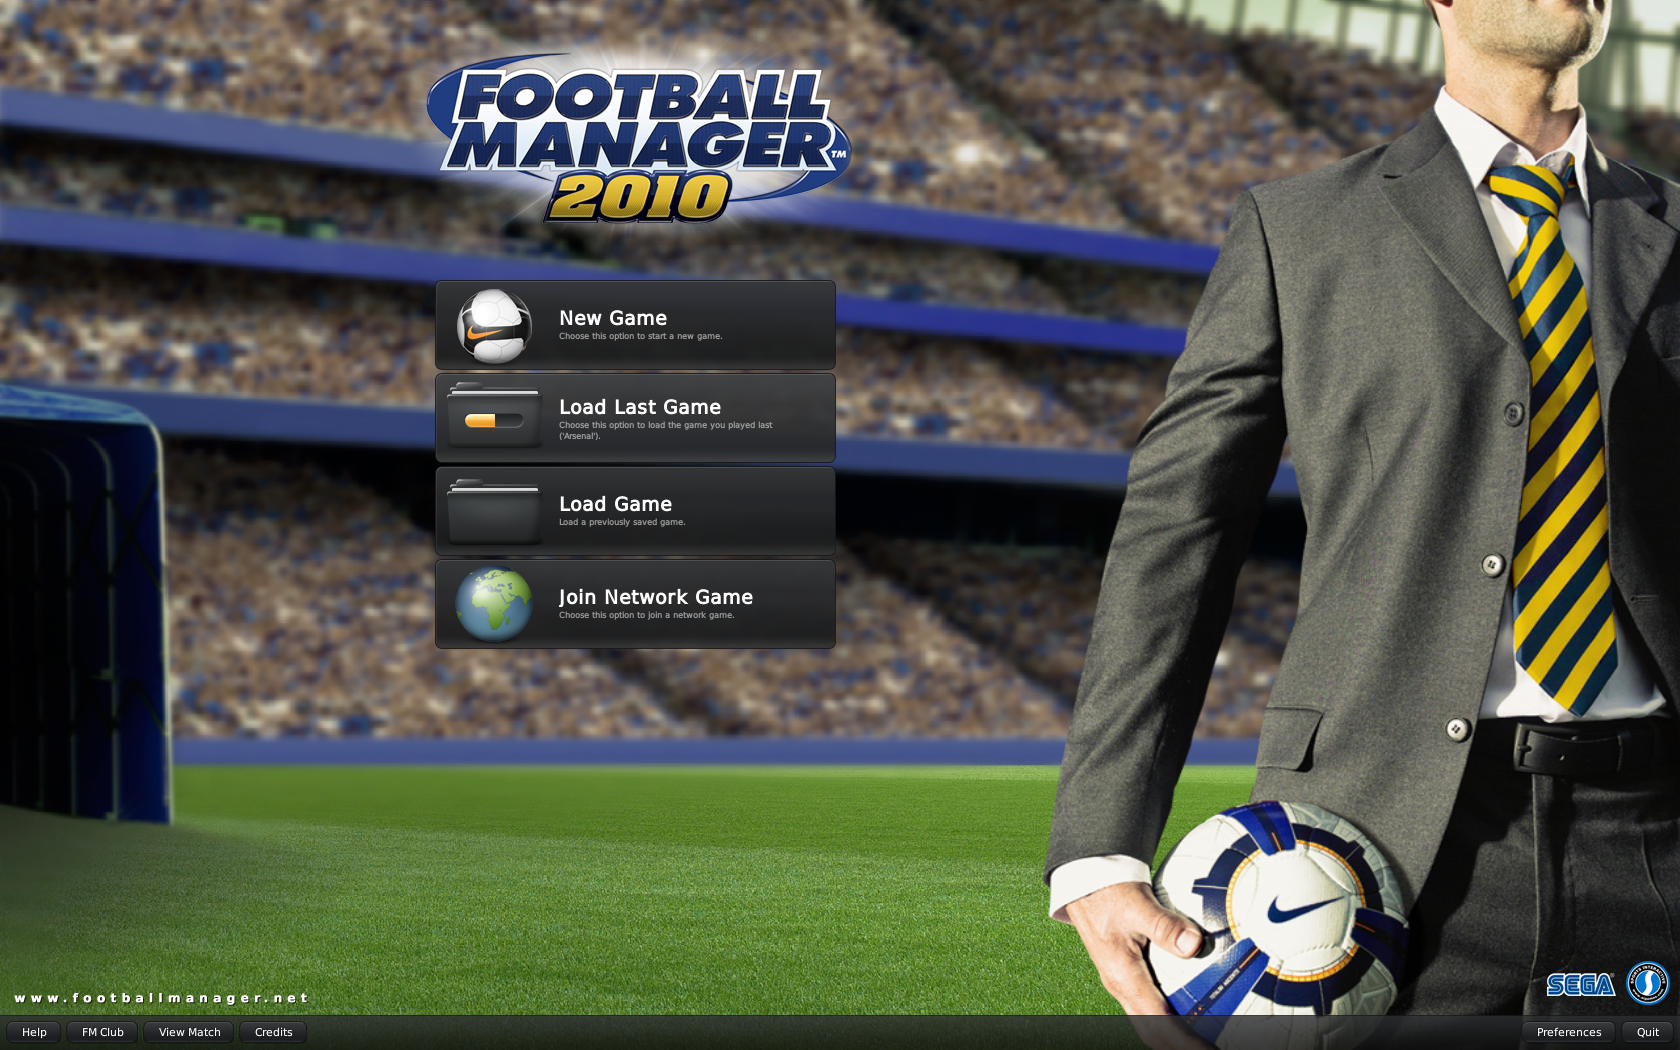 Football managers games. Футбол менеджер. Футбольный менеджер. Football Manager. Футбол менеджер игра.